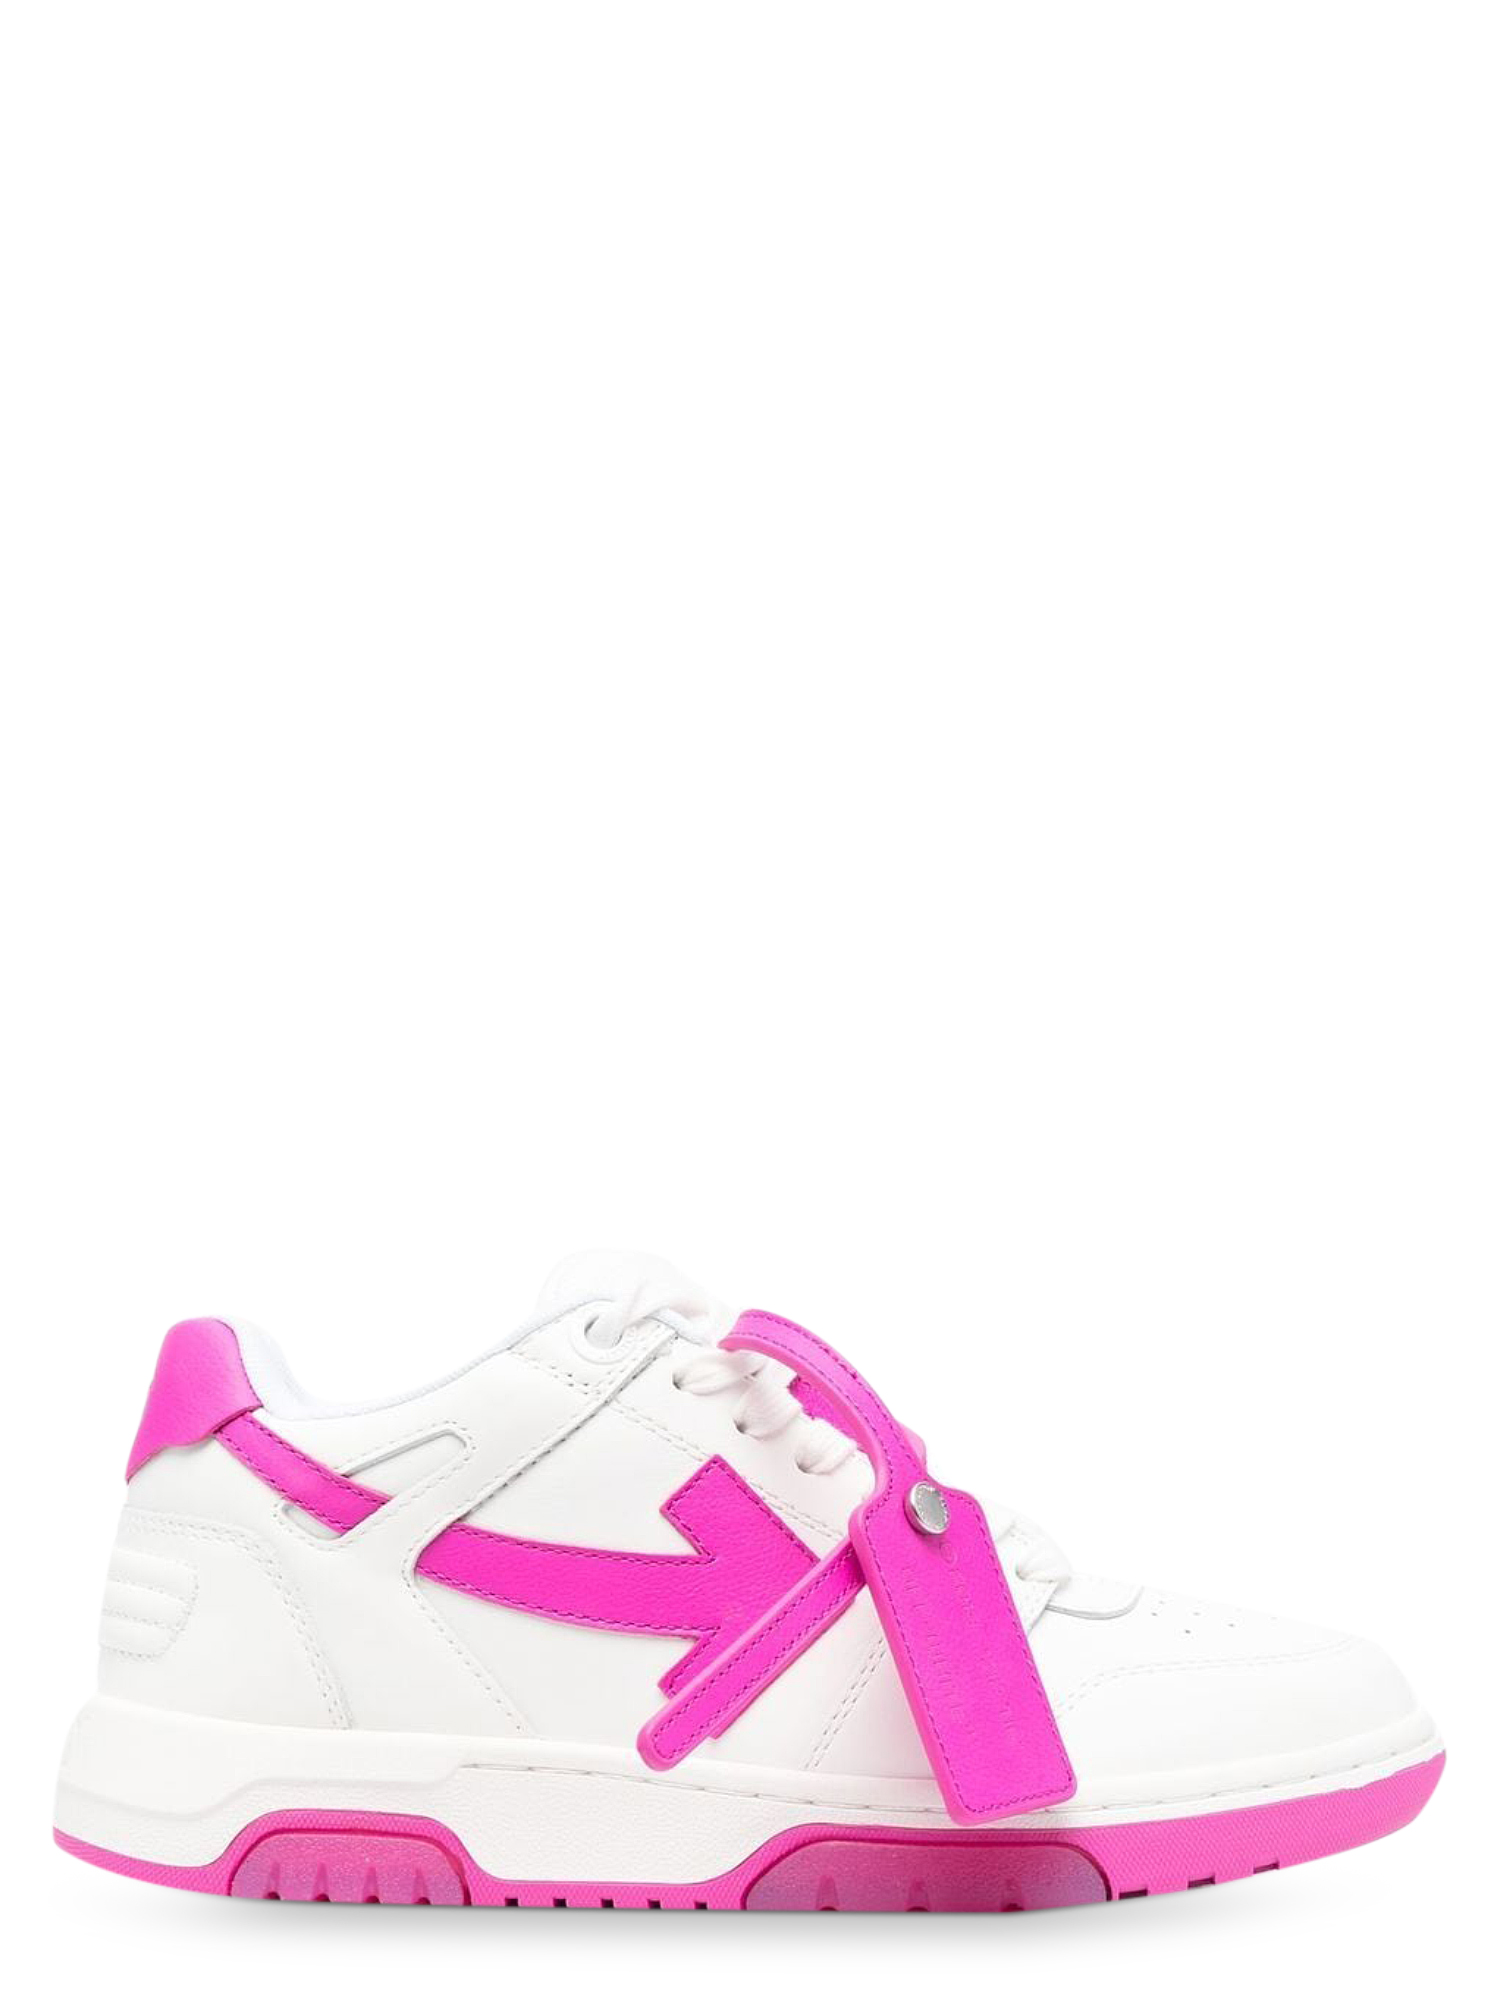 OFF-WHITE WOMEN'S SNEAKERS - OFF-WHITE - IN PINK LEATHER